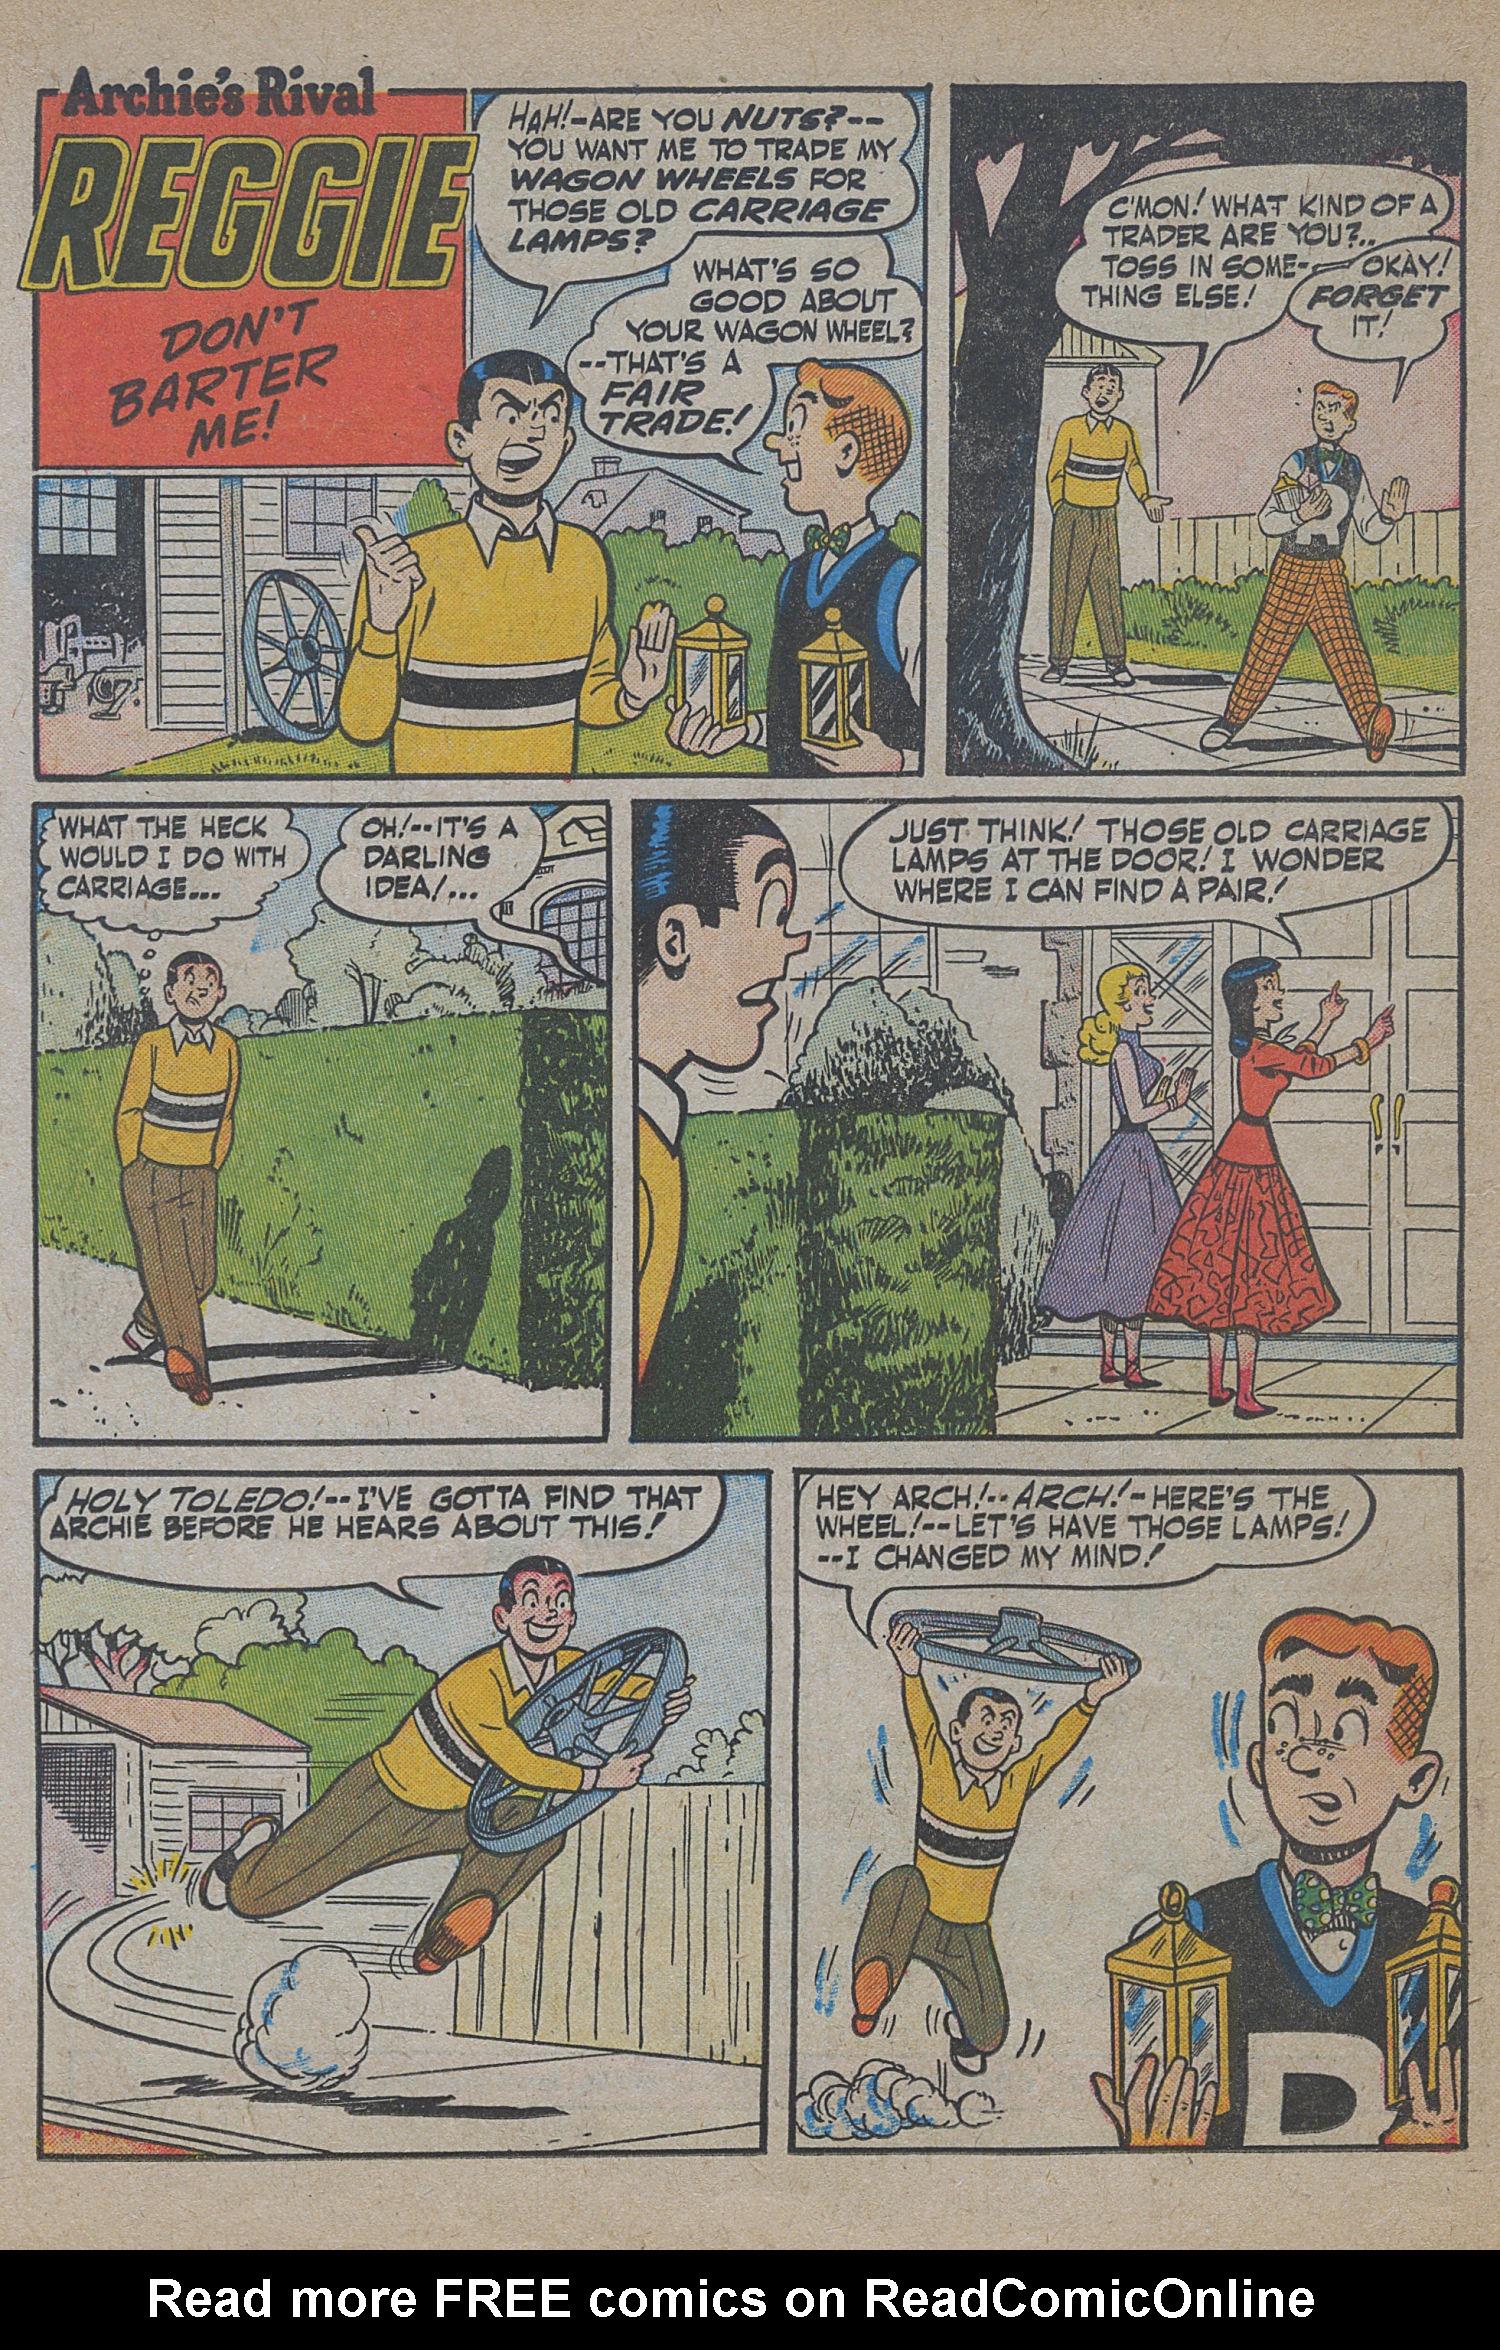 Read online Archie's Rival Reggie comic -  Issue #14 - 14